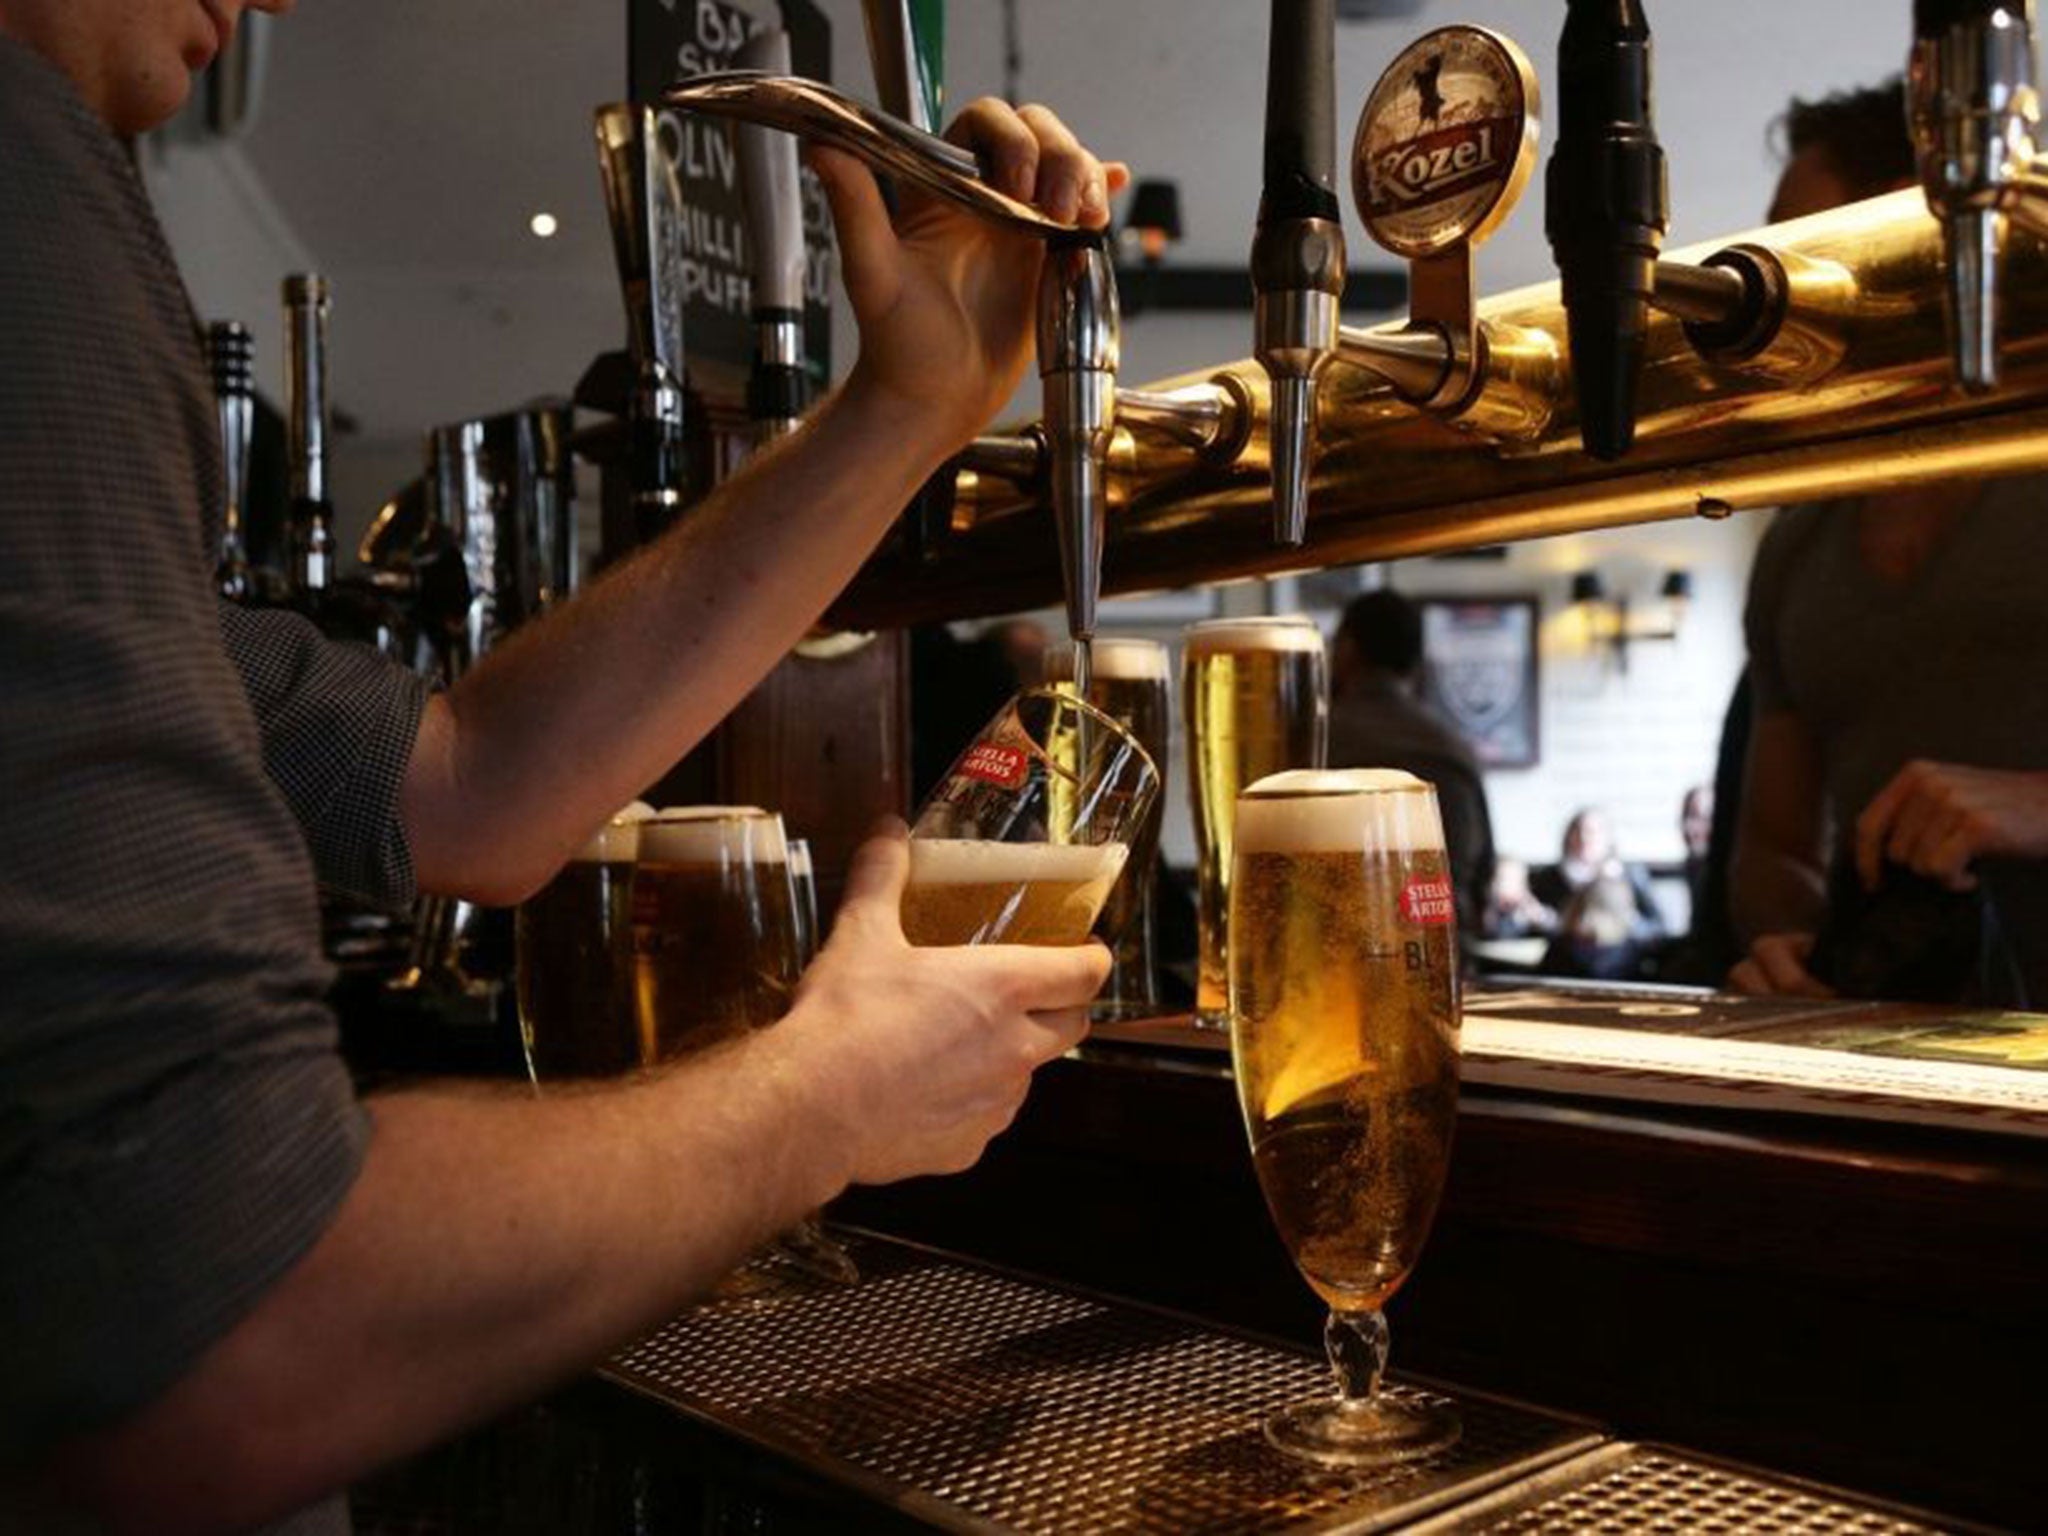 Introducing minimum pricing for alcohol would be up to 50 times more effective than the ban on deep discounting at cutting deaths and hospital admissions, according to research. 